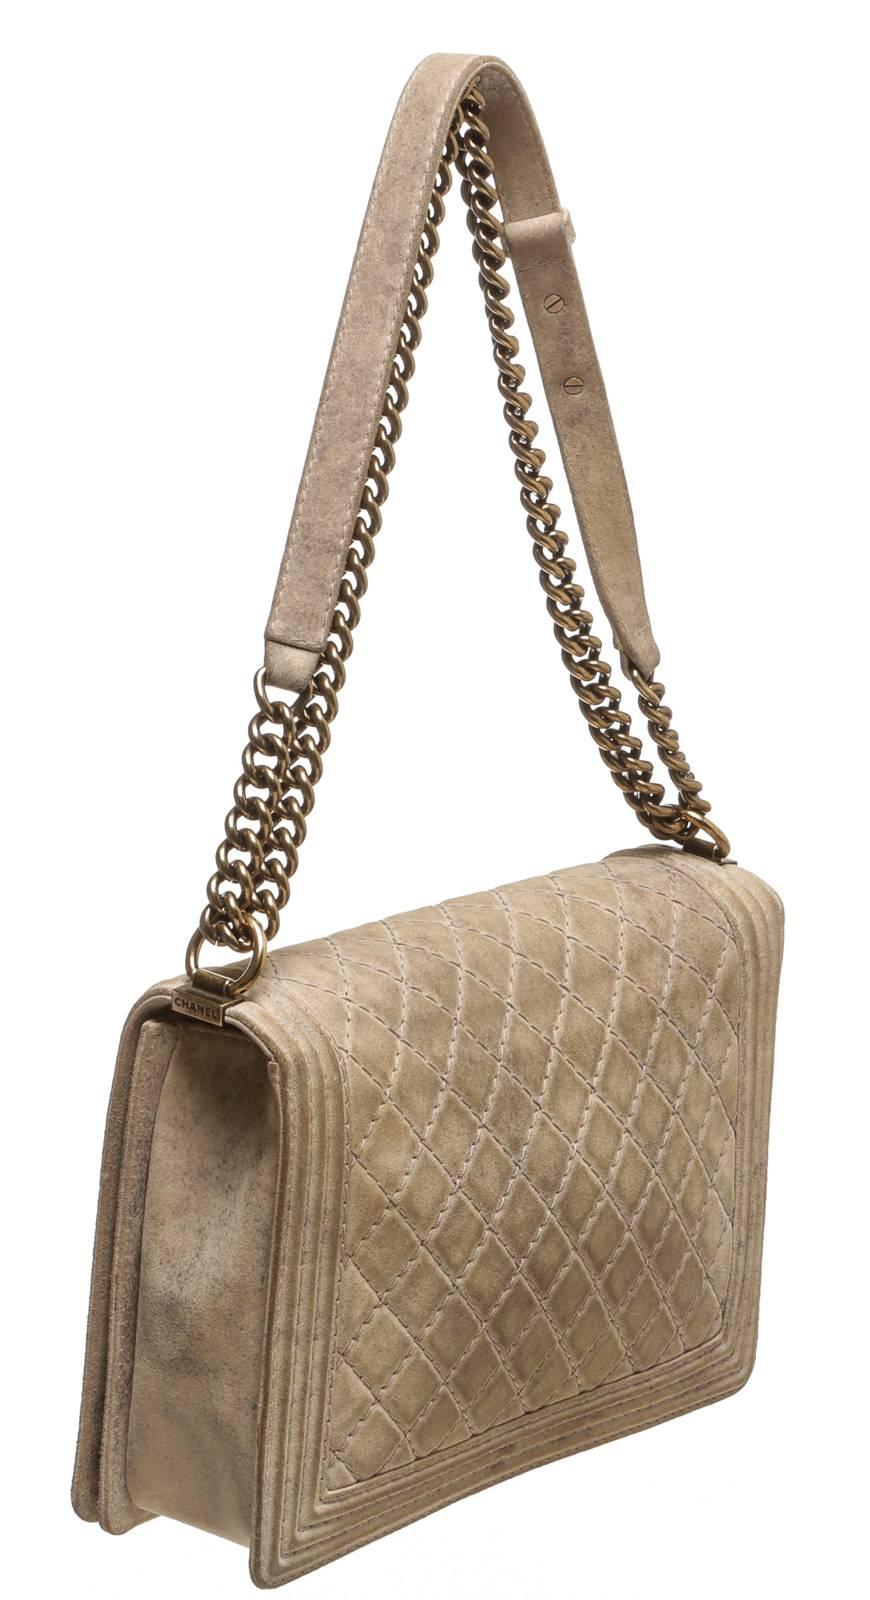 Add a stunning statement to your style with this Large Boy Bag! This one-of-a-kind flap bag features a quilted leather that arches from the front to the back as aged gold-tone hardware moves throughout the chain handle. A leather strap contrasts as